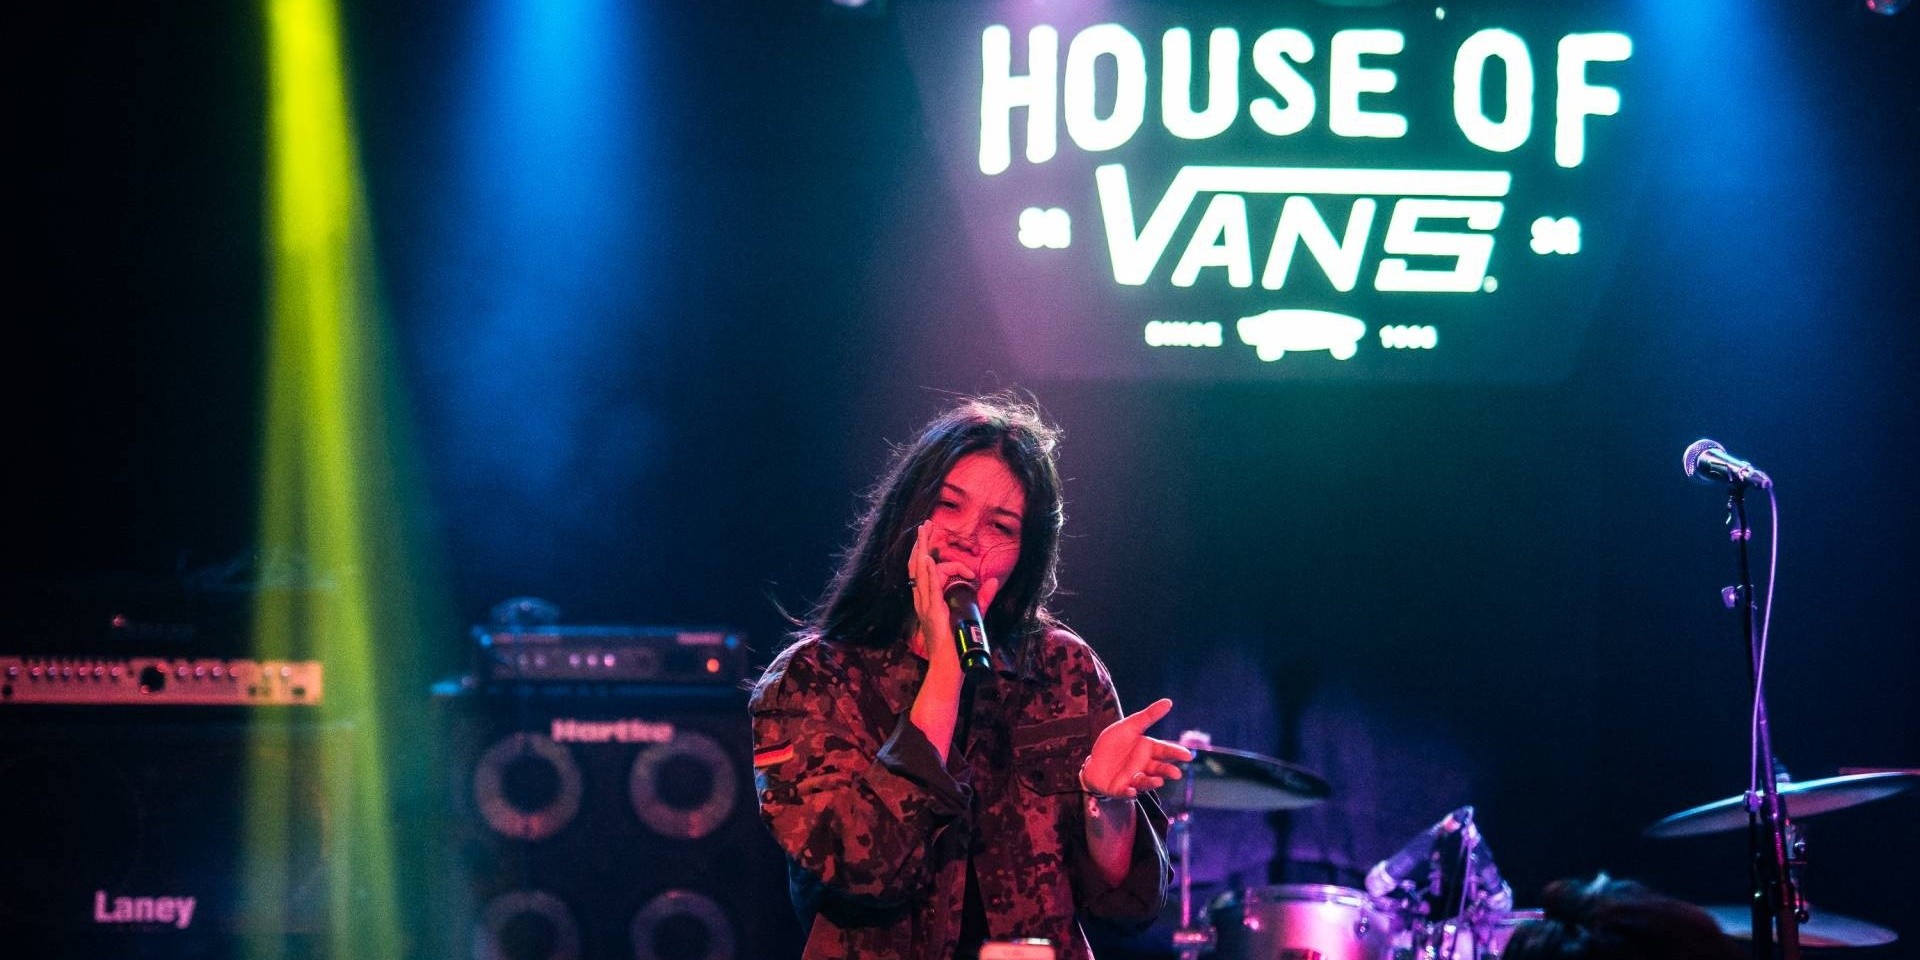 Vans Musicians Wanted 2018: Shye triumphs, Axel Brizzy and The Groove Gurus impress & more